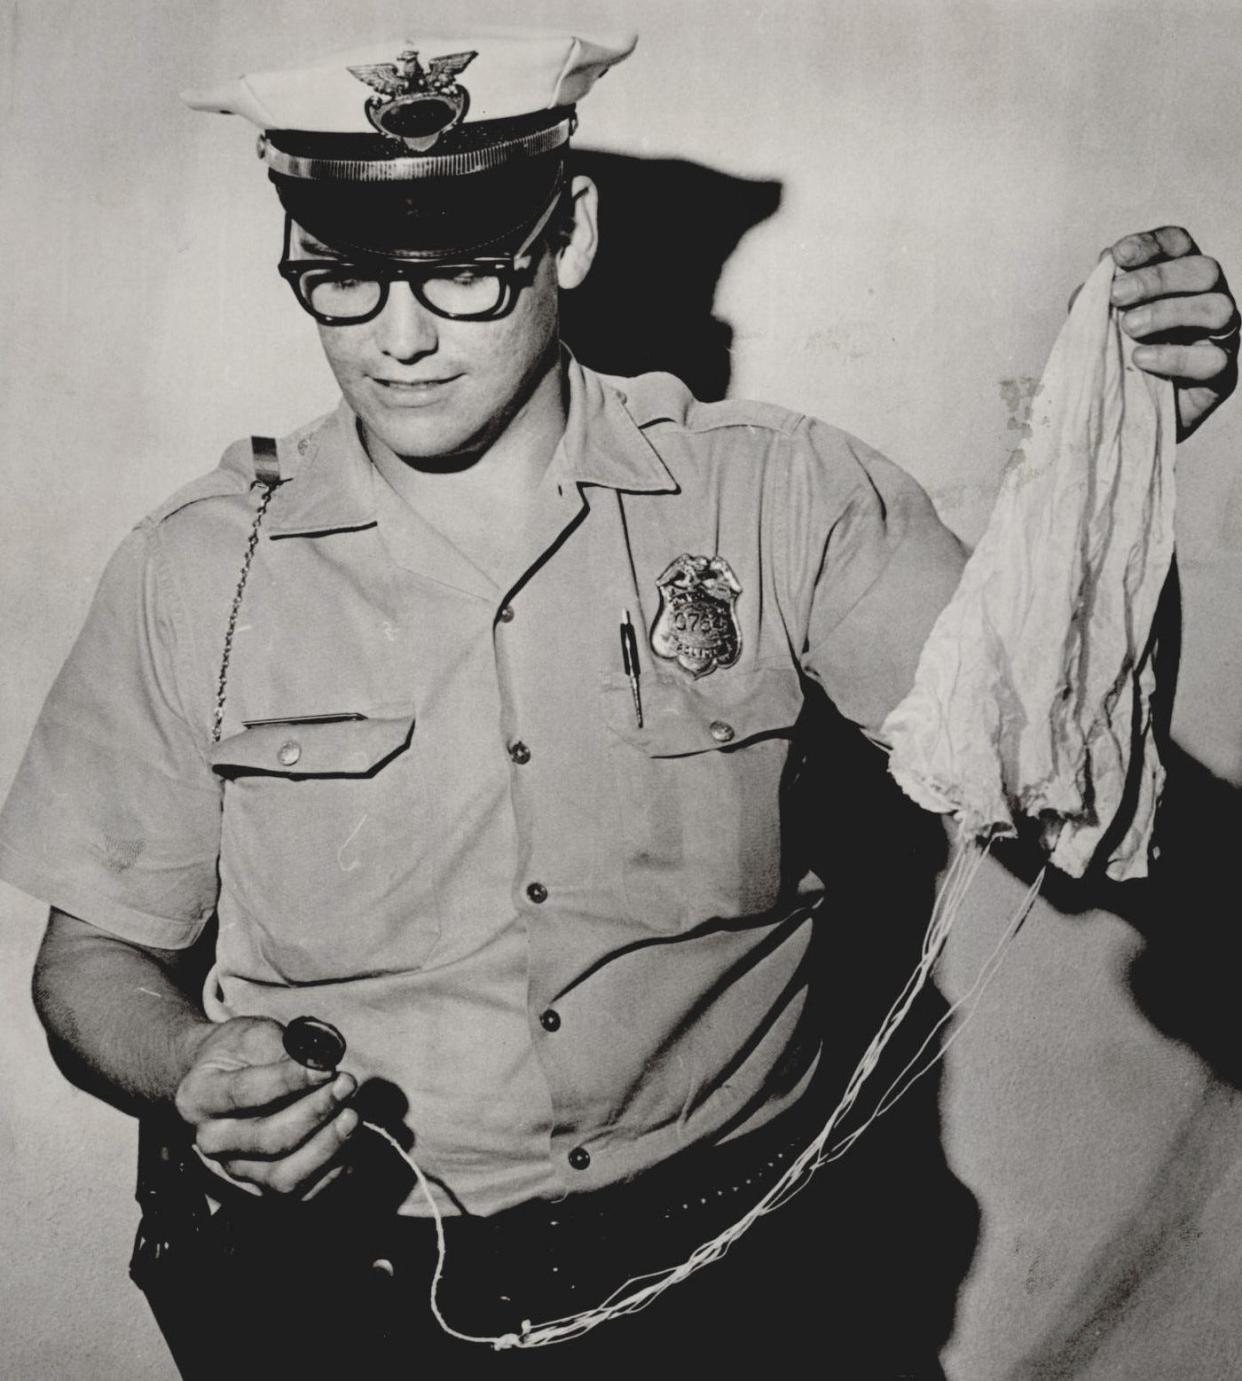 Oklahoma City police officer Richard Boyd holds a small parachute with a flare attached in 1965. For at three straight days, the front pages of The Daily Oklahoman reported numerous sightings of unidentified flying objects across the state, parts of the nation and South America. Residents were shaken by what they had seen in the sky: colorful flashing lights, a kite shaped object, striped and glowing triangular object, flying saucers, a floating white globe. "People are upset. They want to know what they are, and we can't tell them," an Oklahoma City police dispatcher said. Some officials proposed the numerous UFO sightings, many at high altitudes, might have been caused by meteors, a bright evening star, balloons, optical illusions and atmospheric conditions. Amid the ongoing calls to police, Boyd recovered the small parachute after it was seen floating down near SE 53 and Shields.